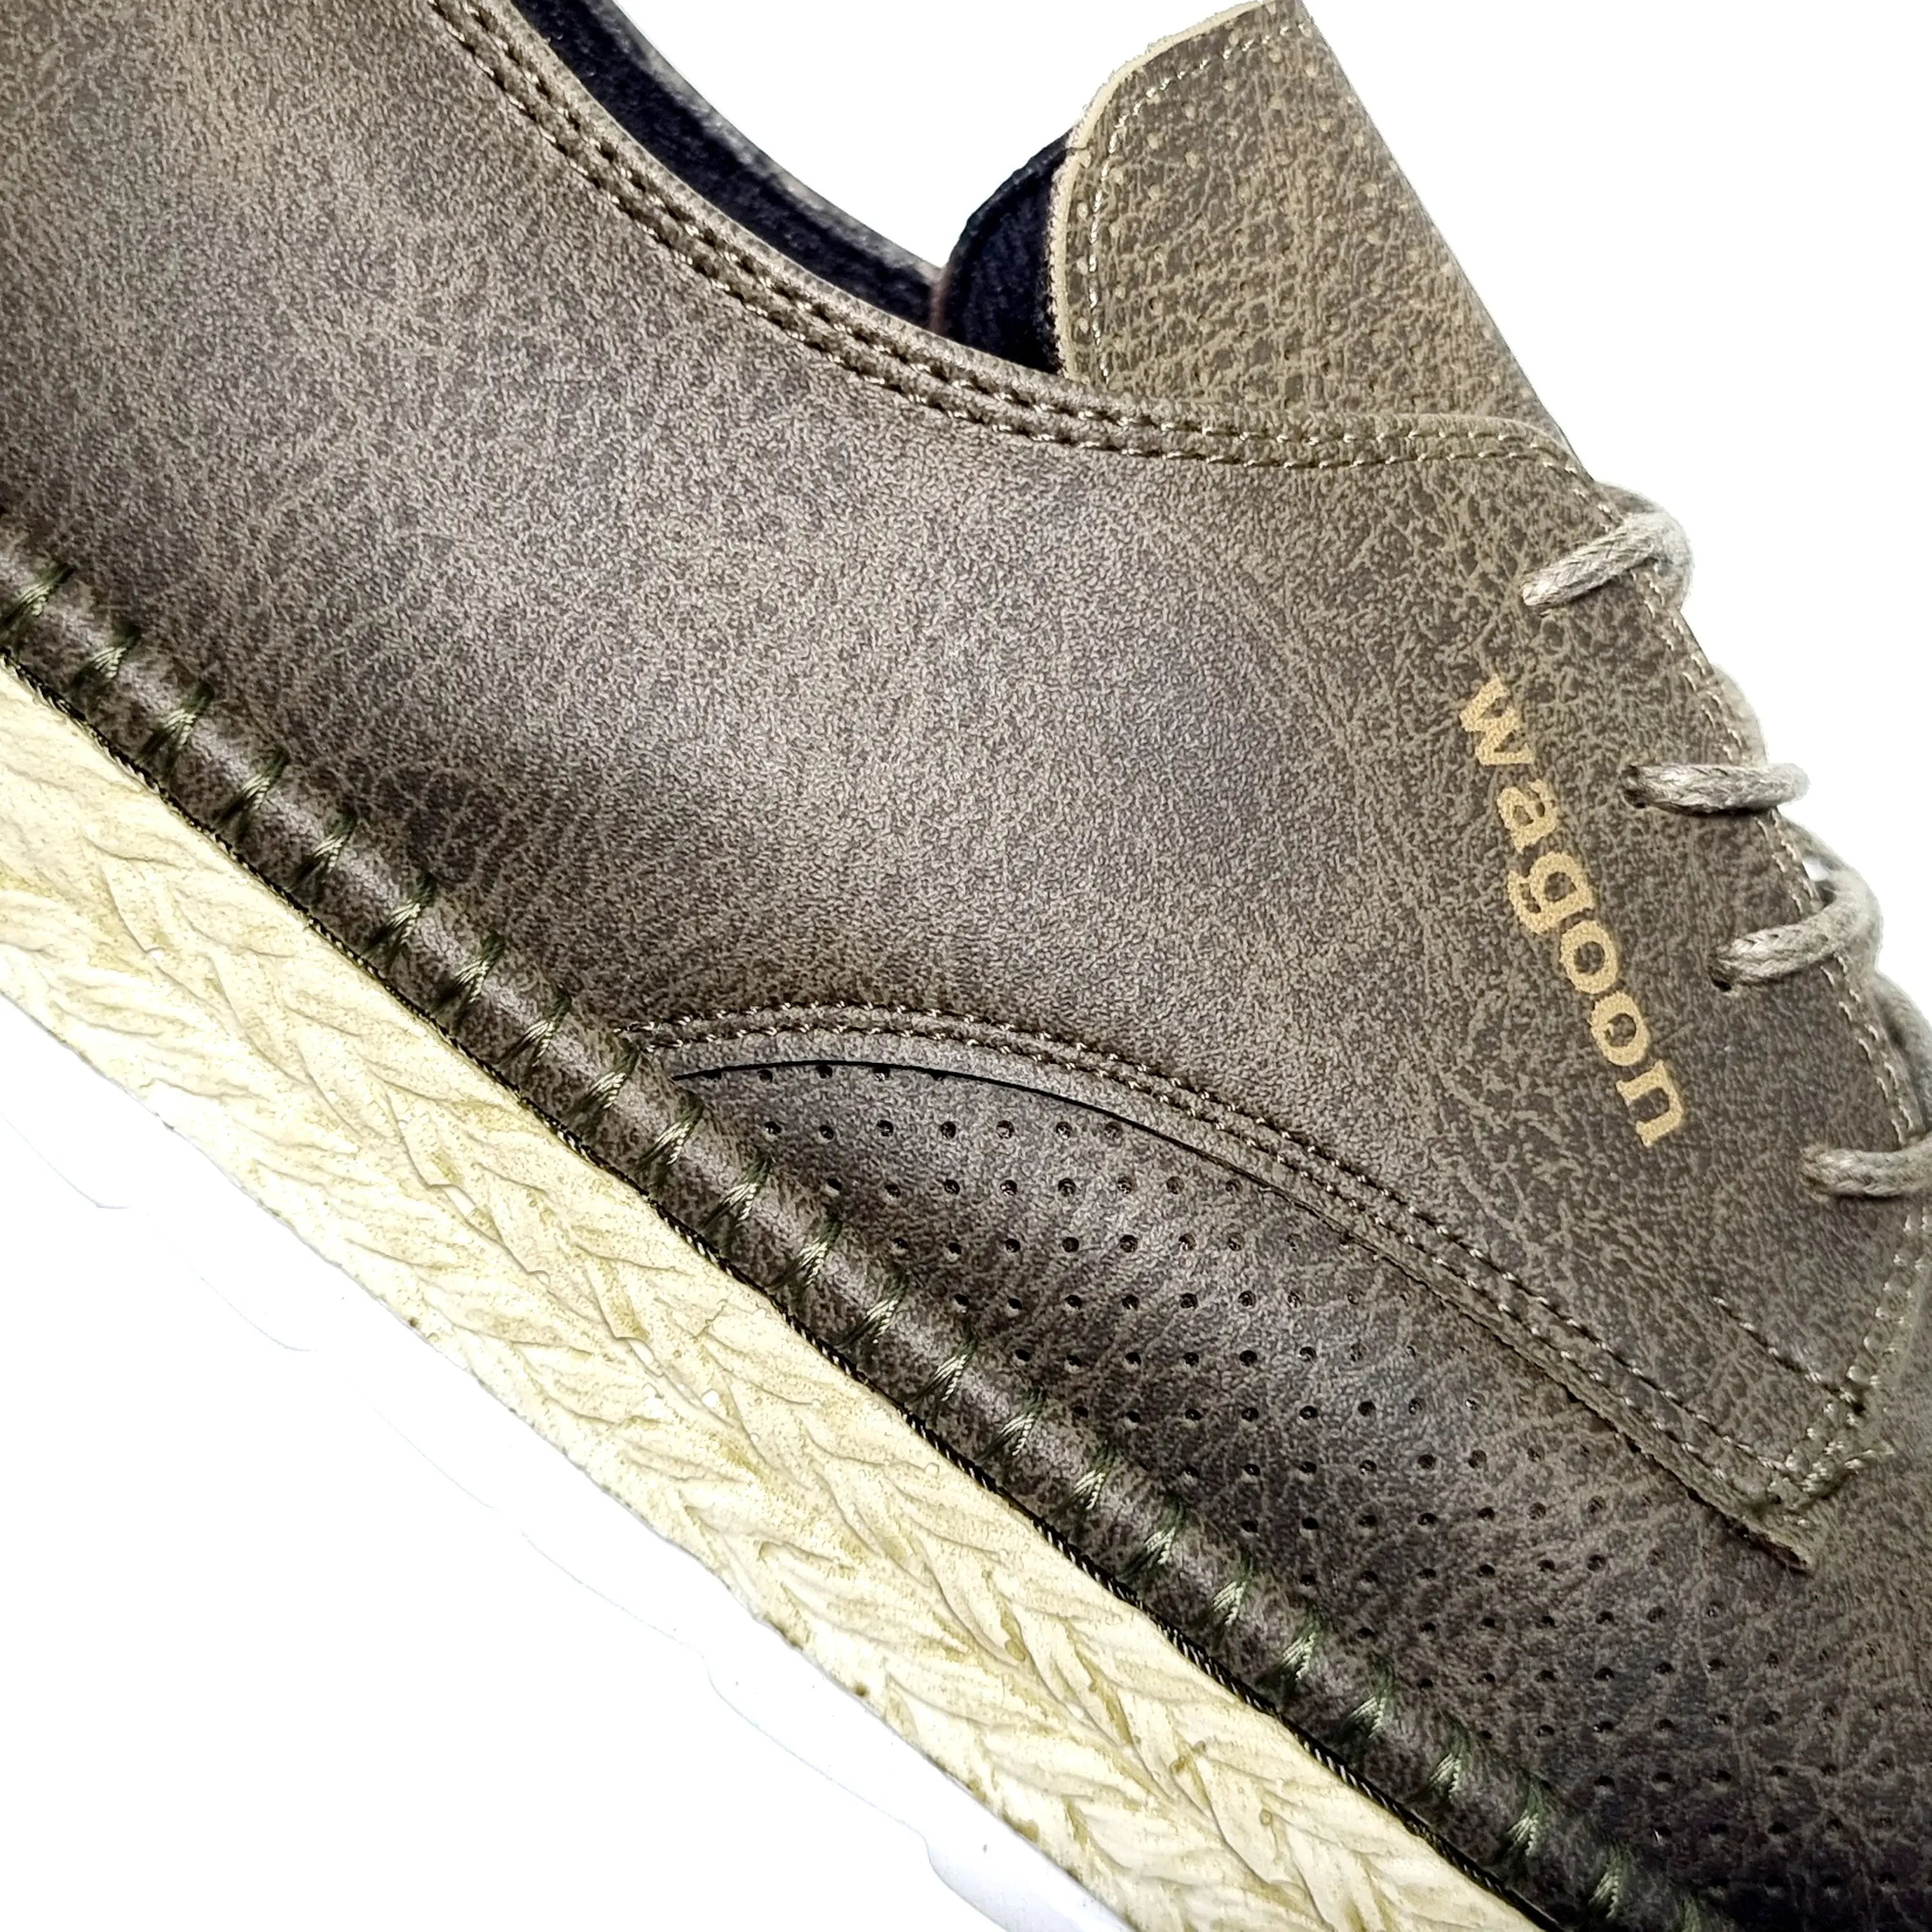 WAGOON 012 OLIVE Sneakers | familyshoecentre